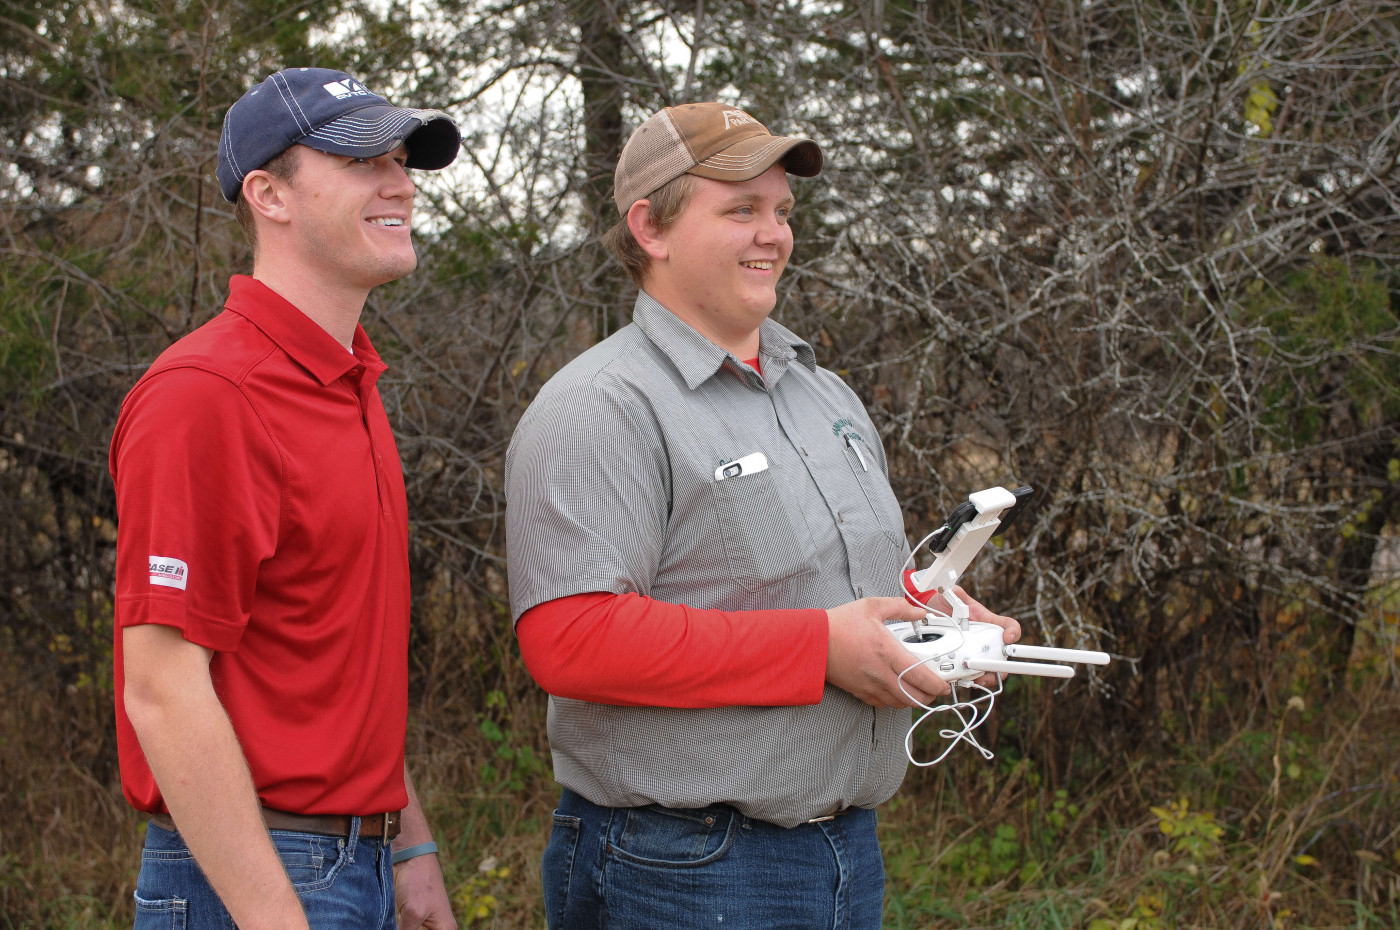 Two ag students using drones for precision